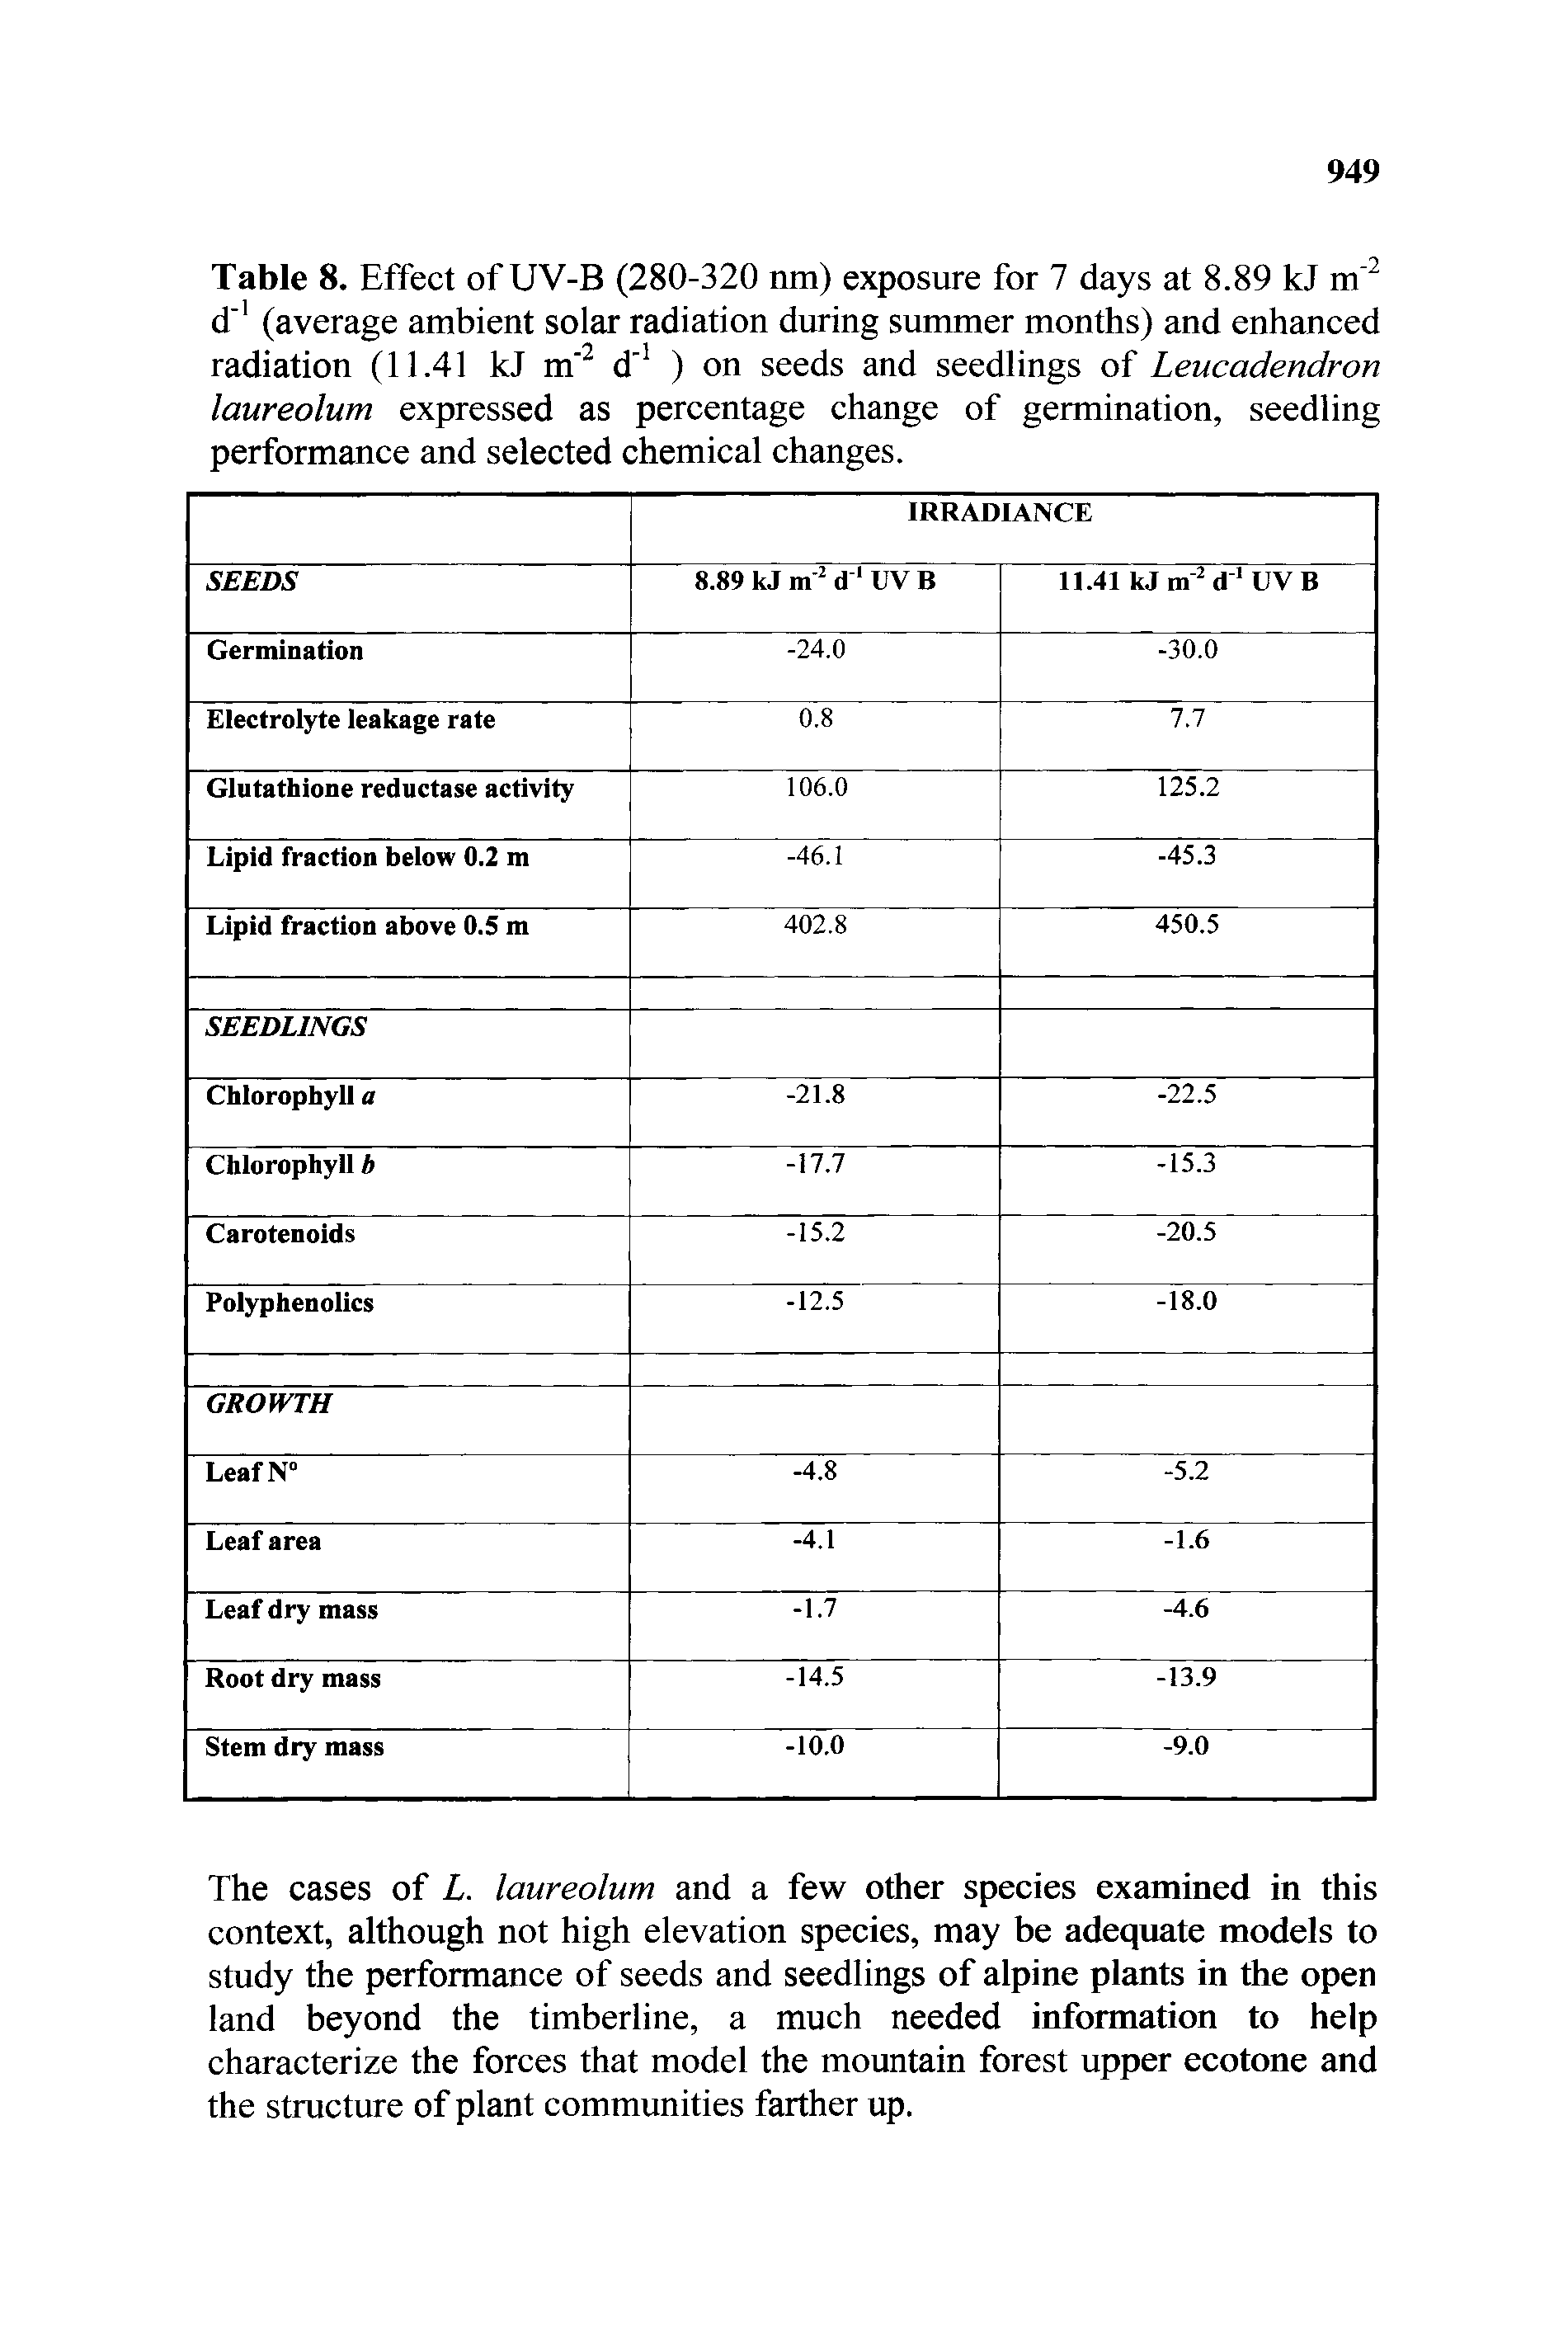 Table 8. Effect of UV-B (280-320 nm) exposure for 7 days at 8.89 kJ m d" (average ambient solar radiation during summer months) and enhanced radiation (11.41 kJ d ) on seeds and seedlings of Leucadendron laureolum expressed as percentage change of germination, seedling performance and selected chemical changes.